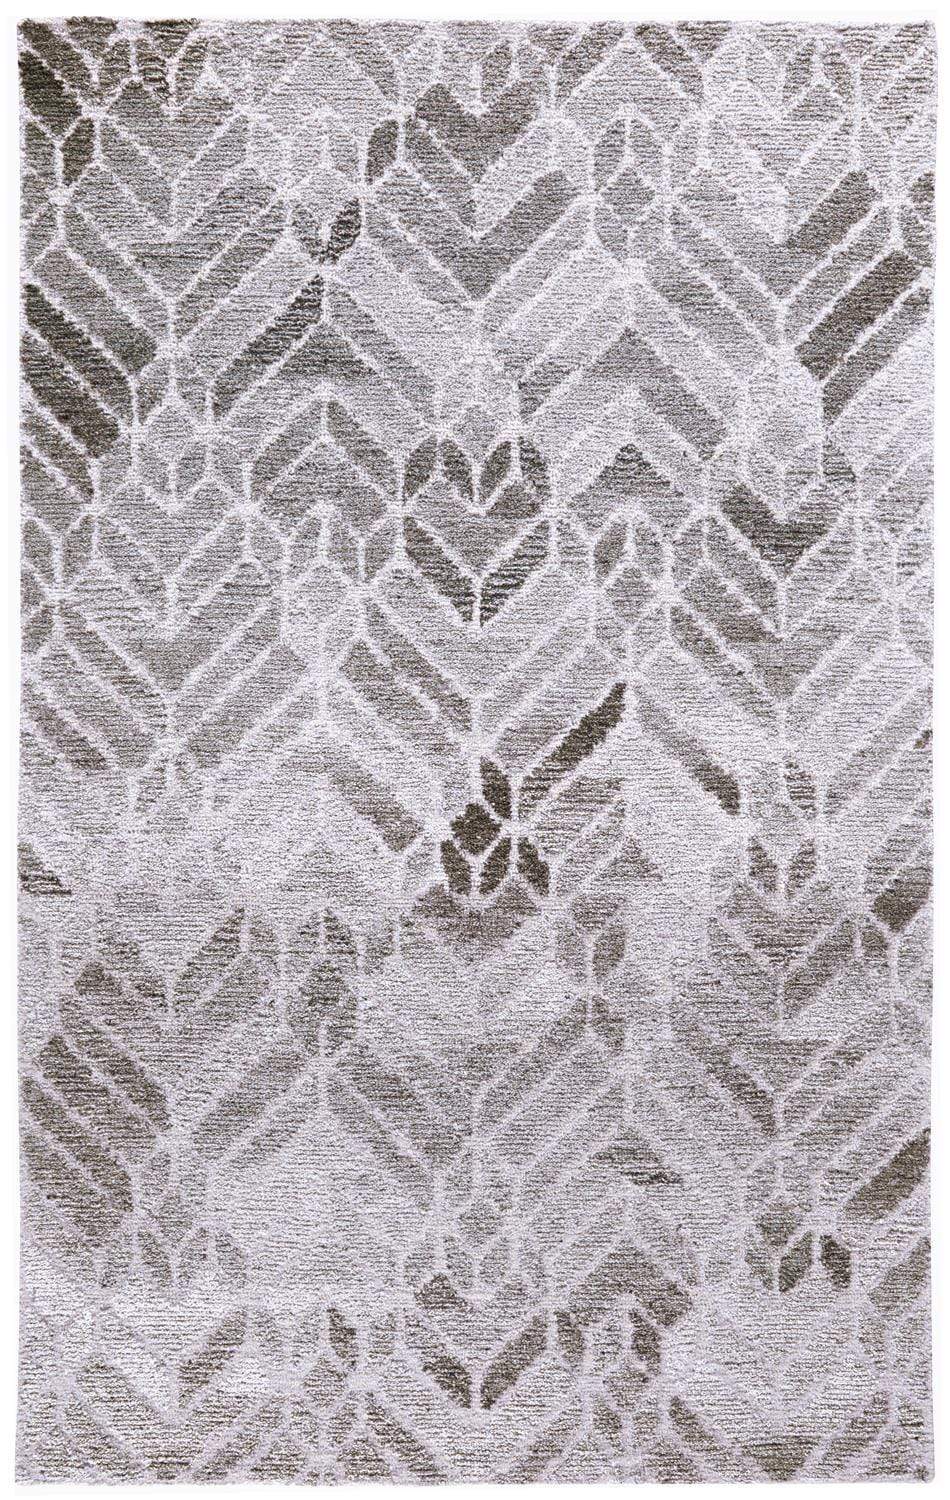 Feizy Feizy Home Asher Rug - Gray/Natural 2' x 3' 8638769FGRYNATP00